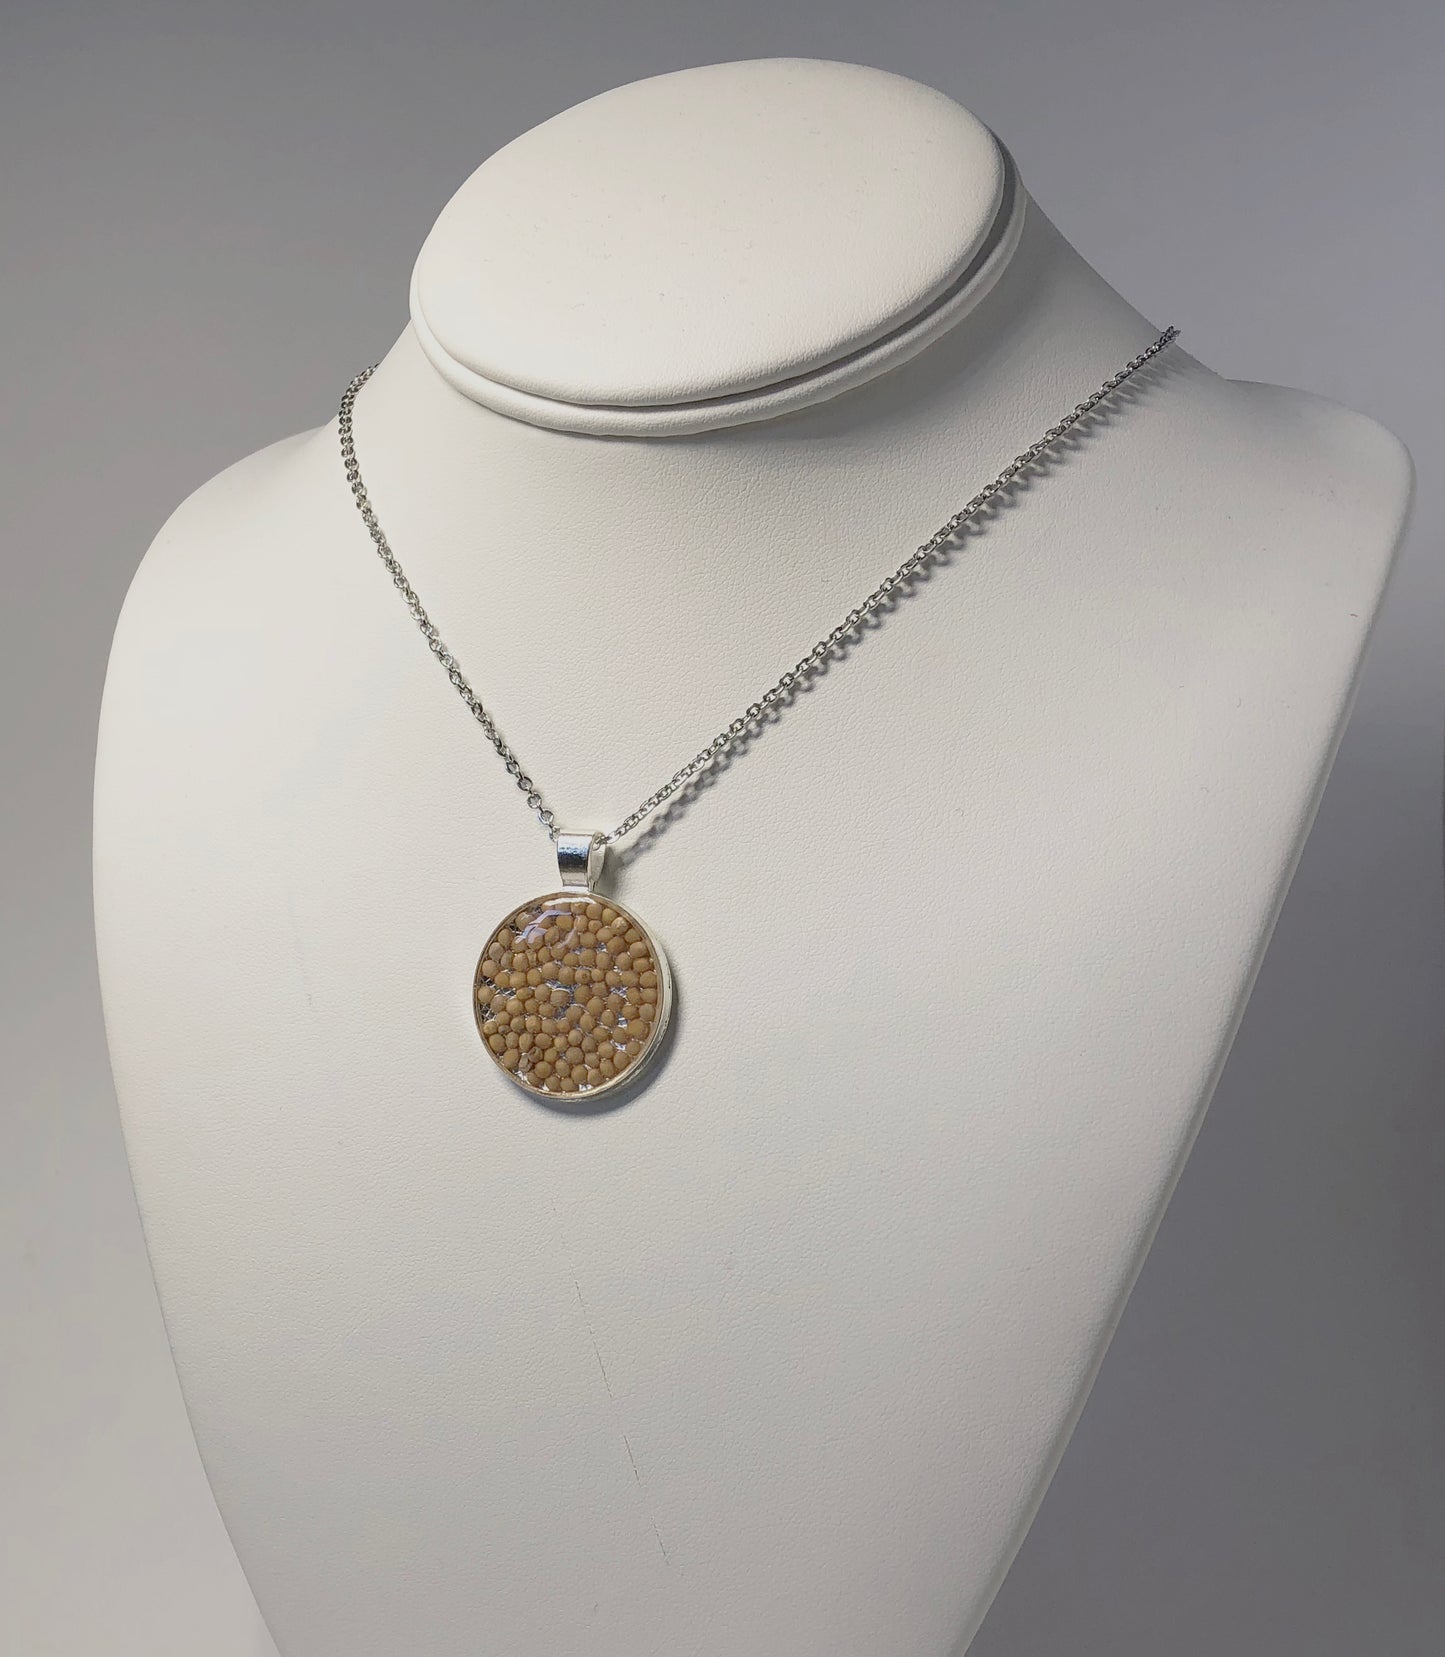 Mustard Seed Pendant Necklace